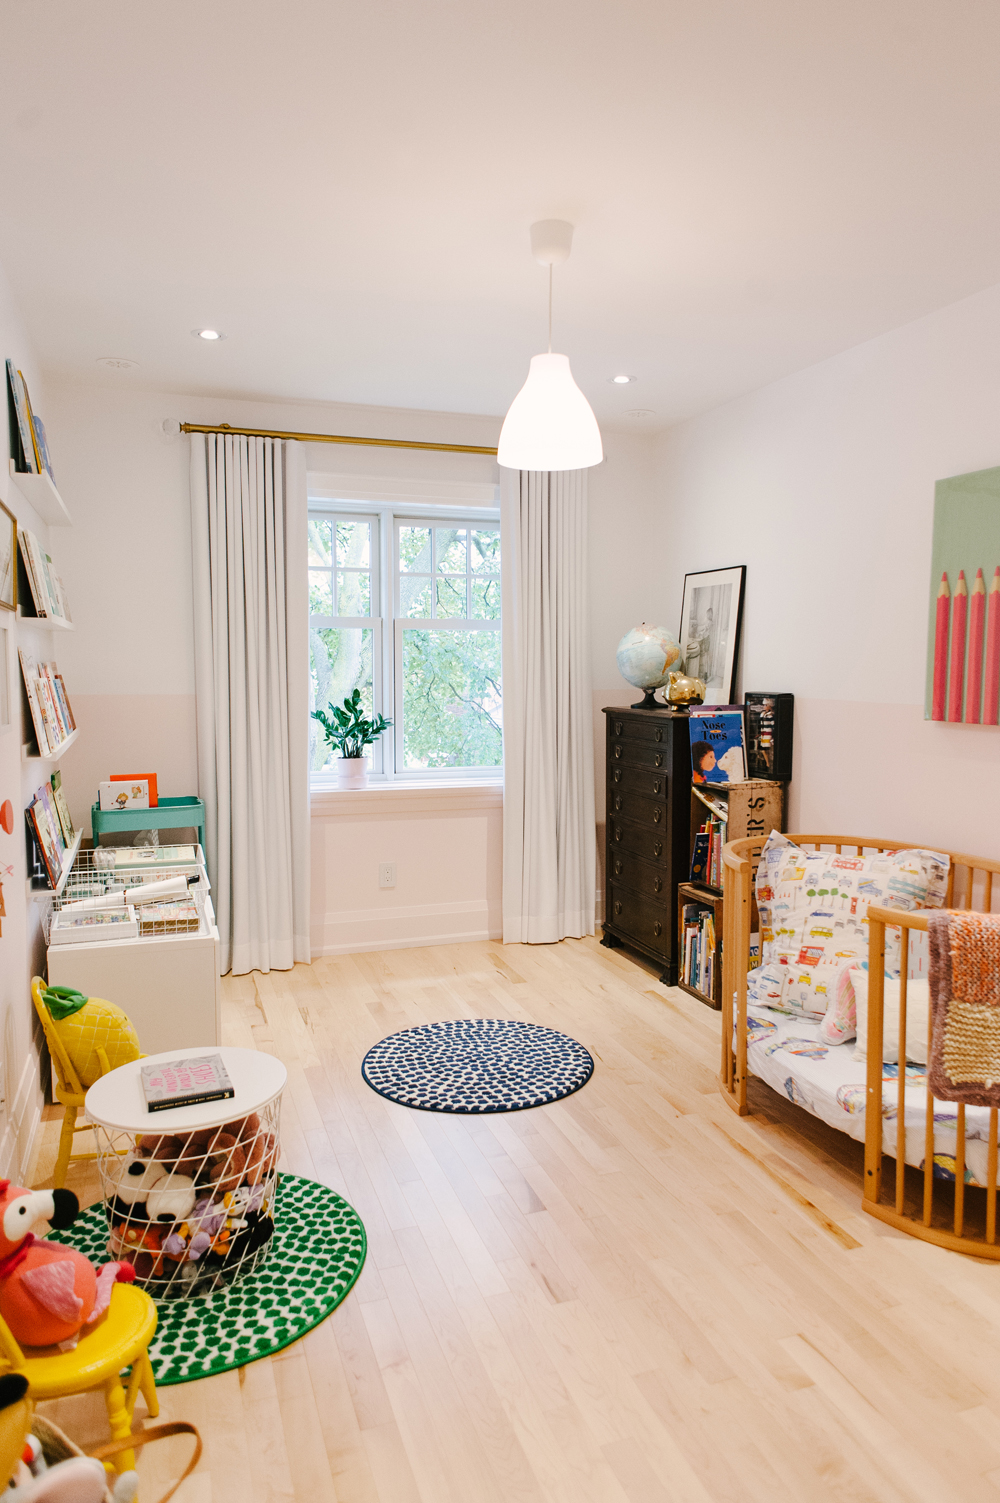 Child's room with books and stuffed animals